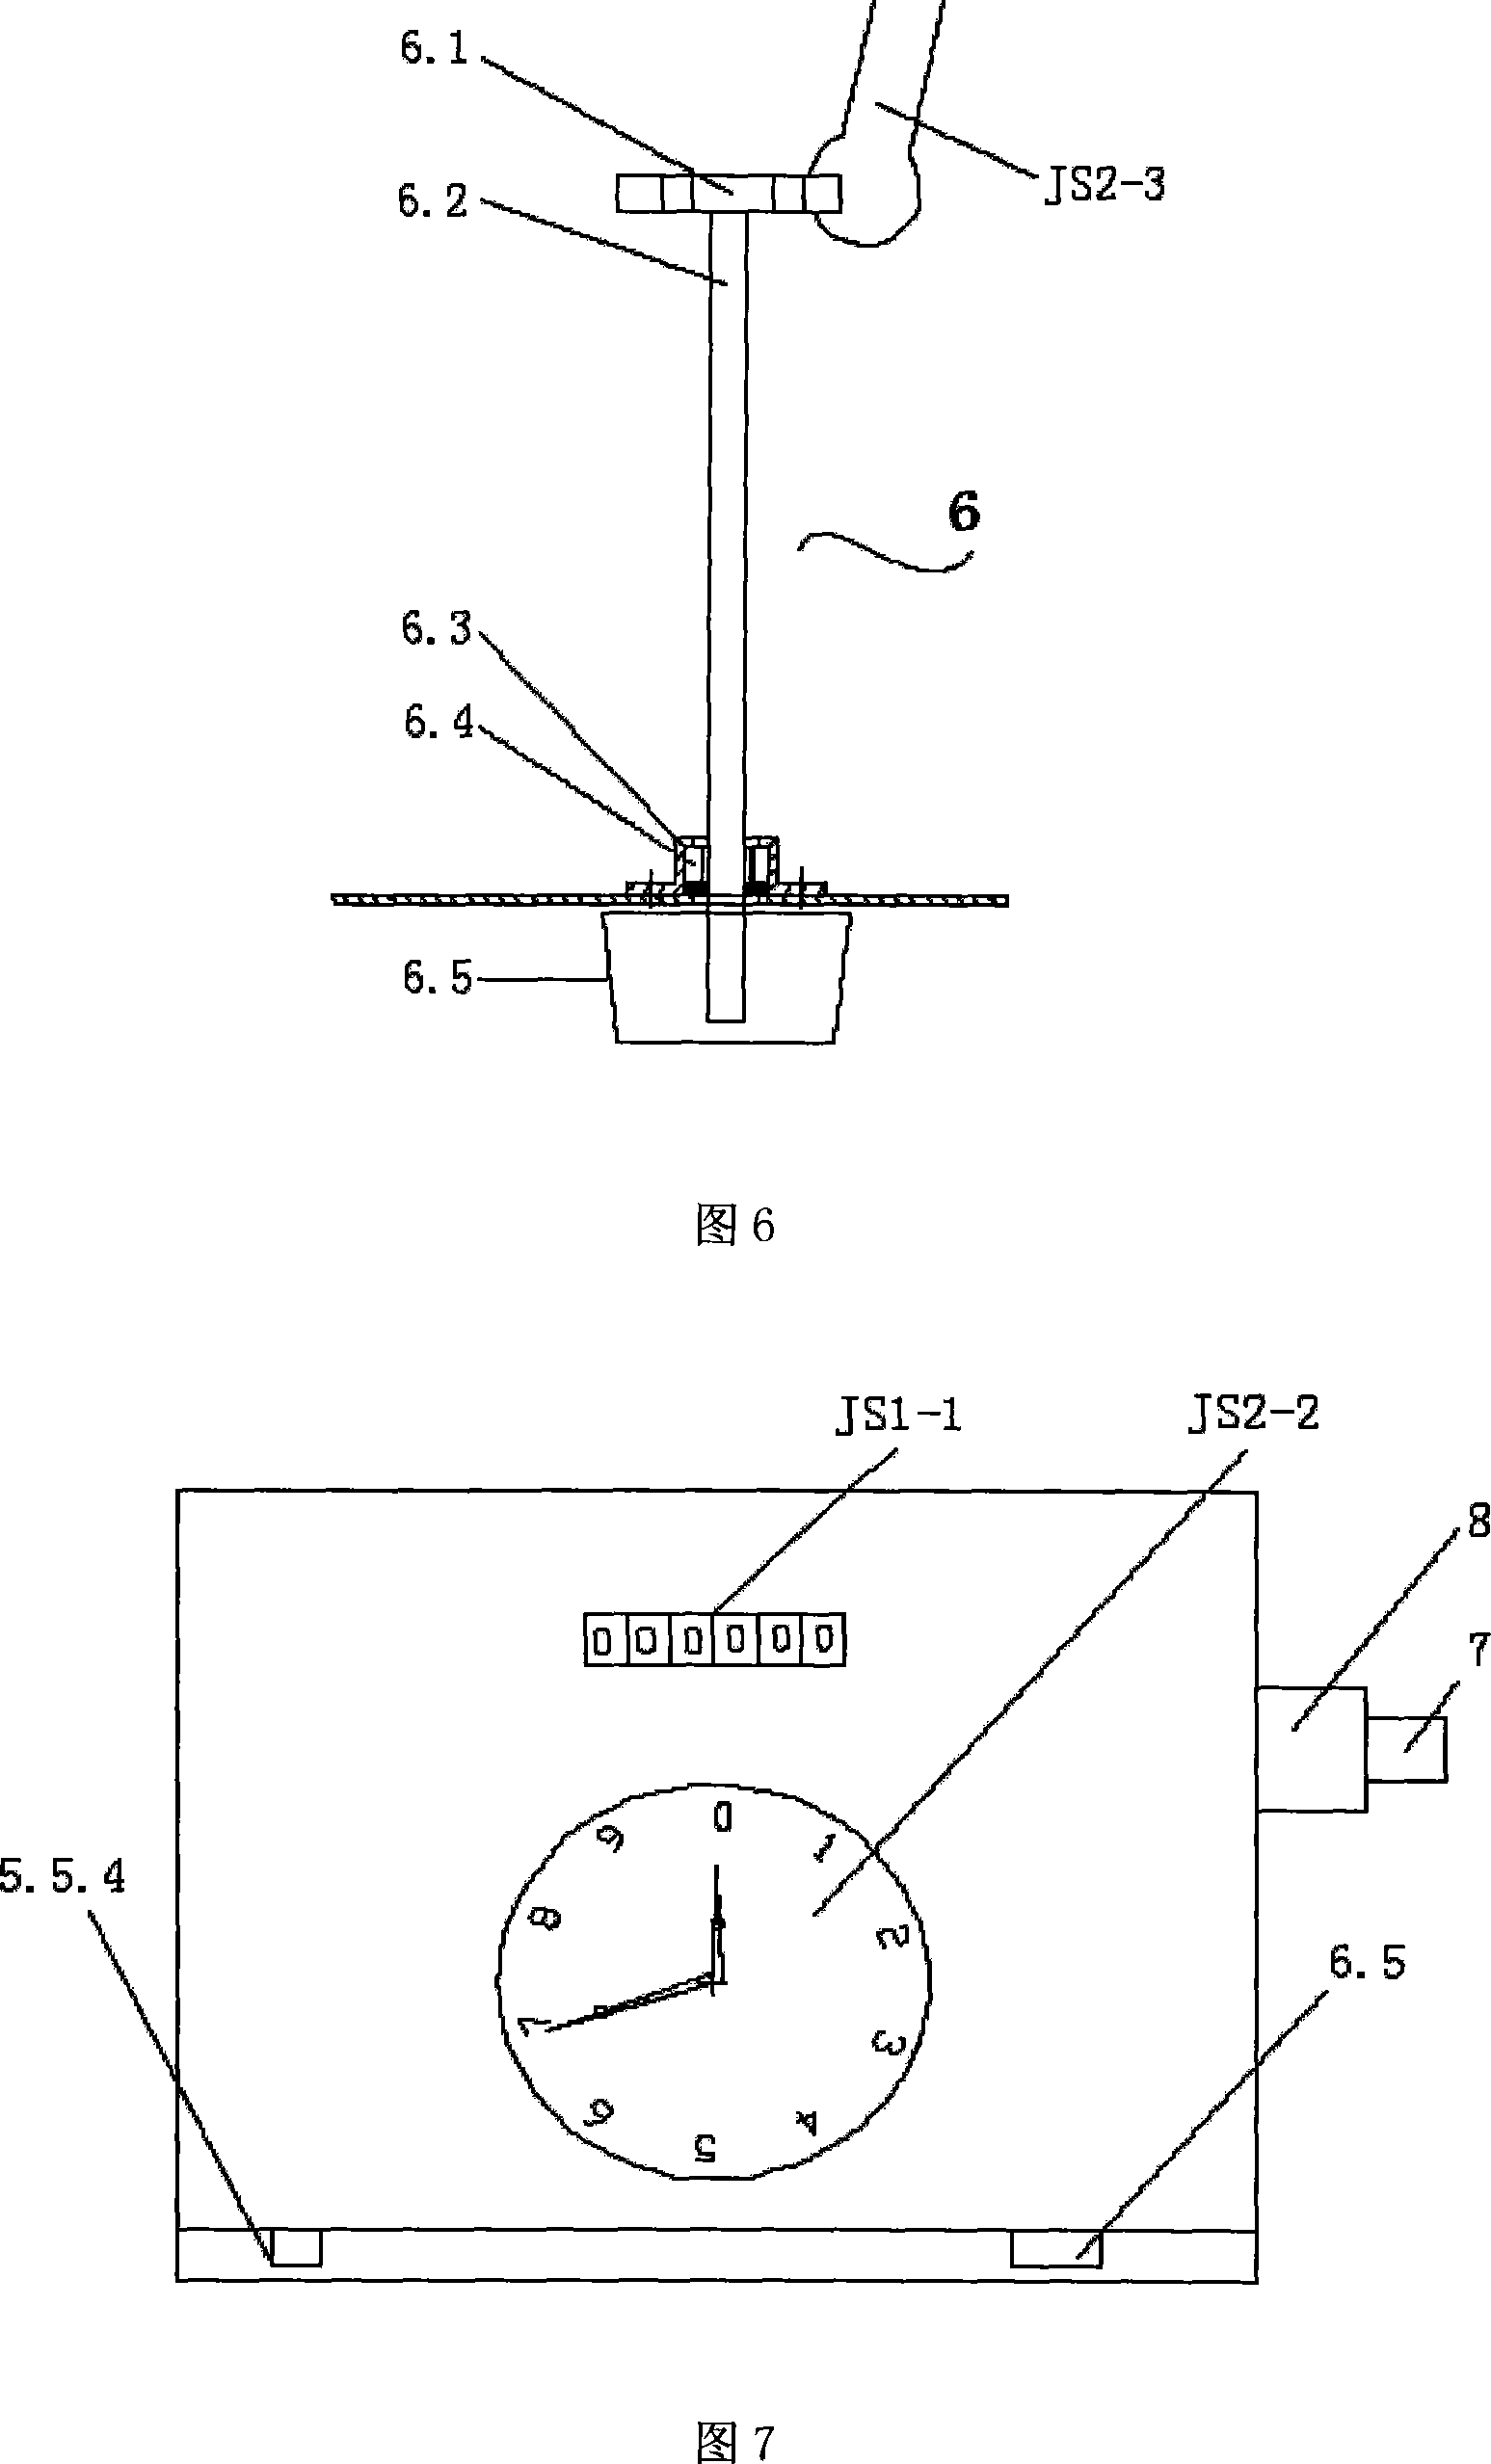 Status indicator of arrester with gap line